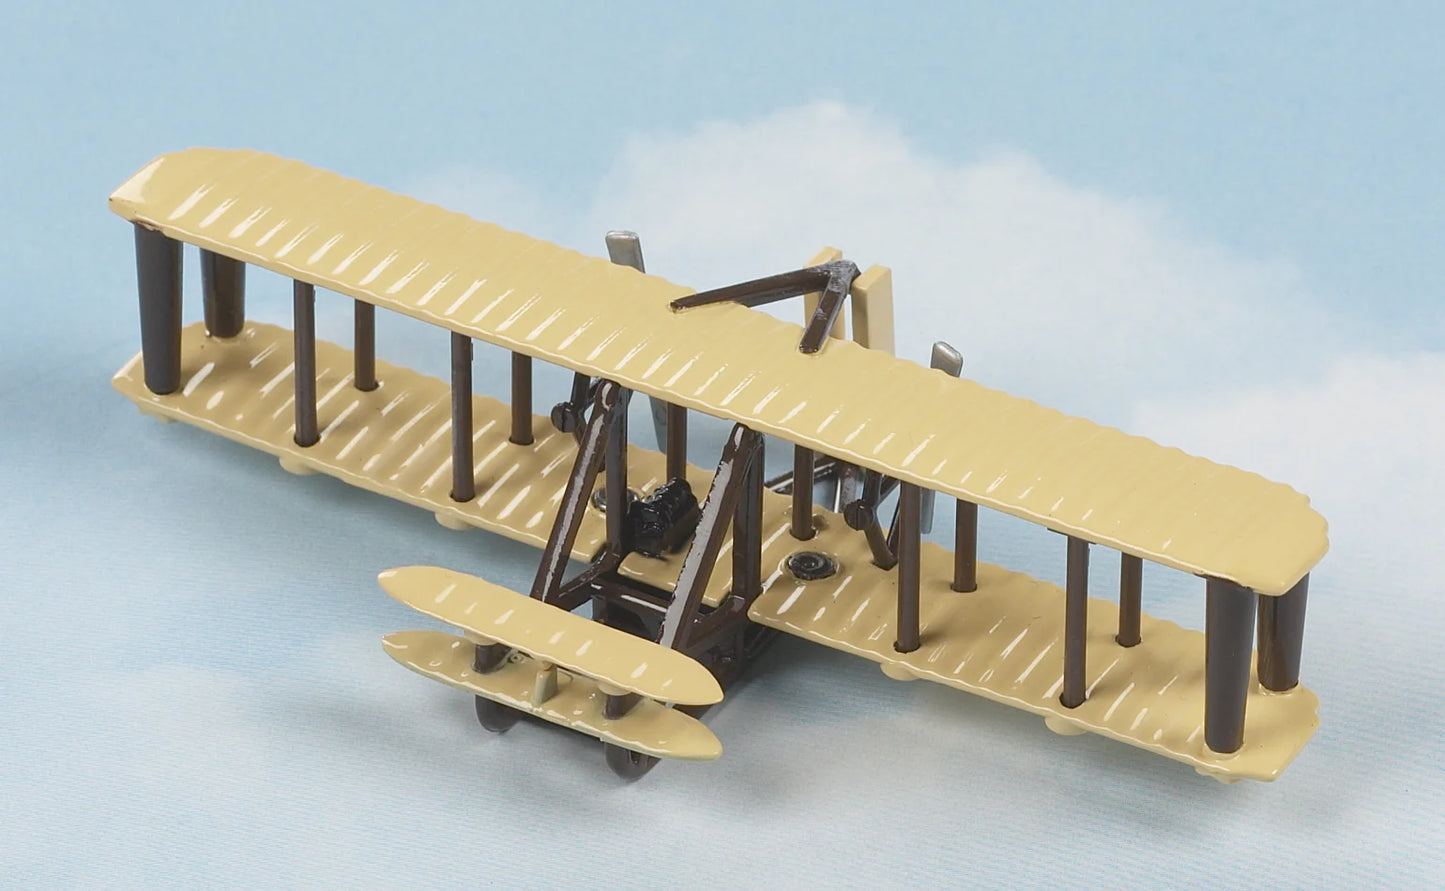 Hot Wings Planes Wright Flyer with Connectible Runway